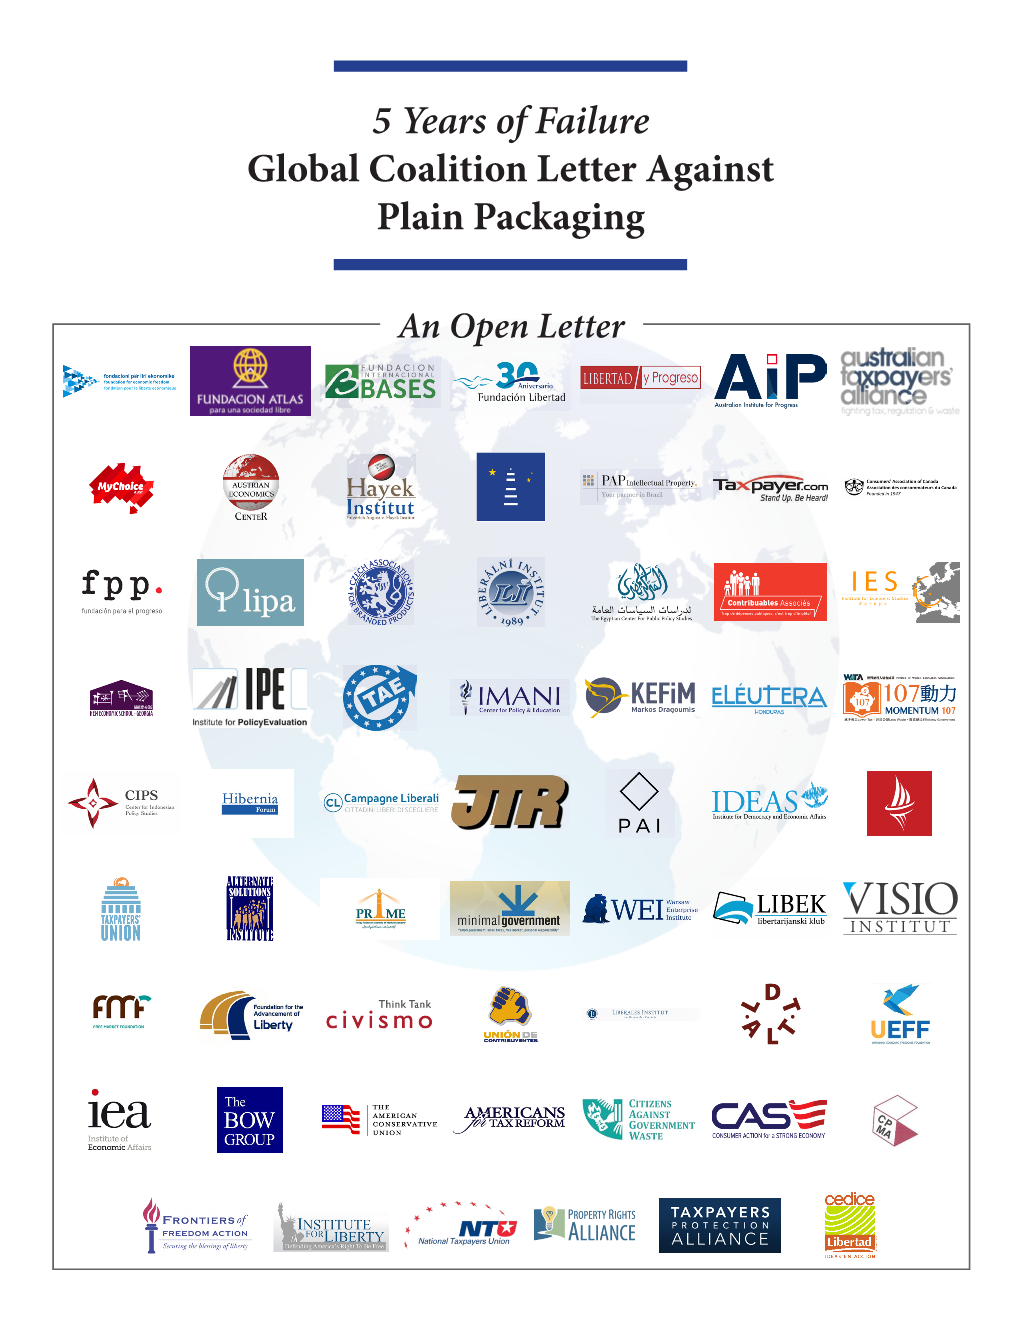 5 Years of Failure Global Coalition Letter Against Plain Packaging